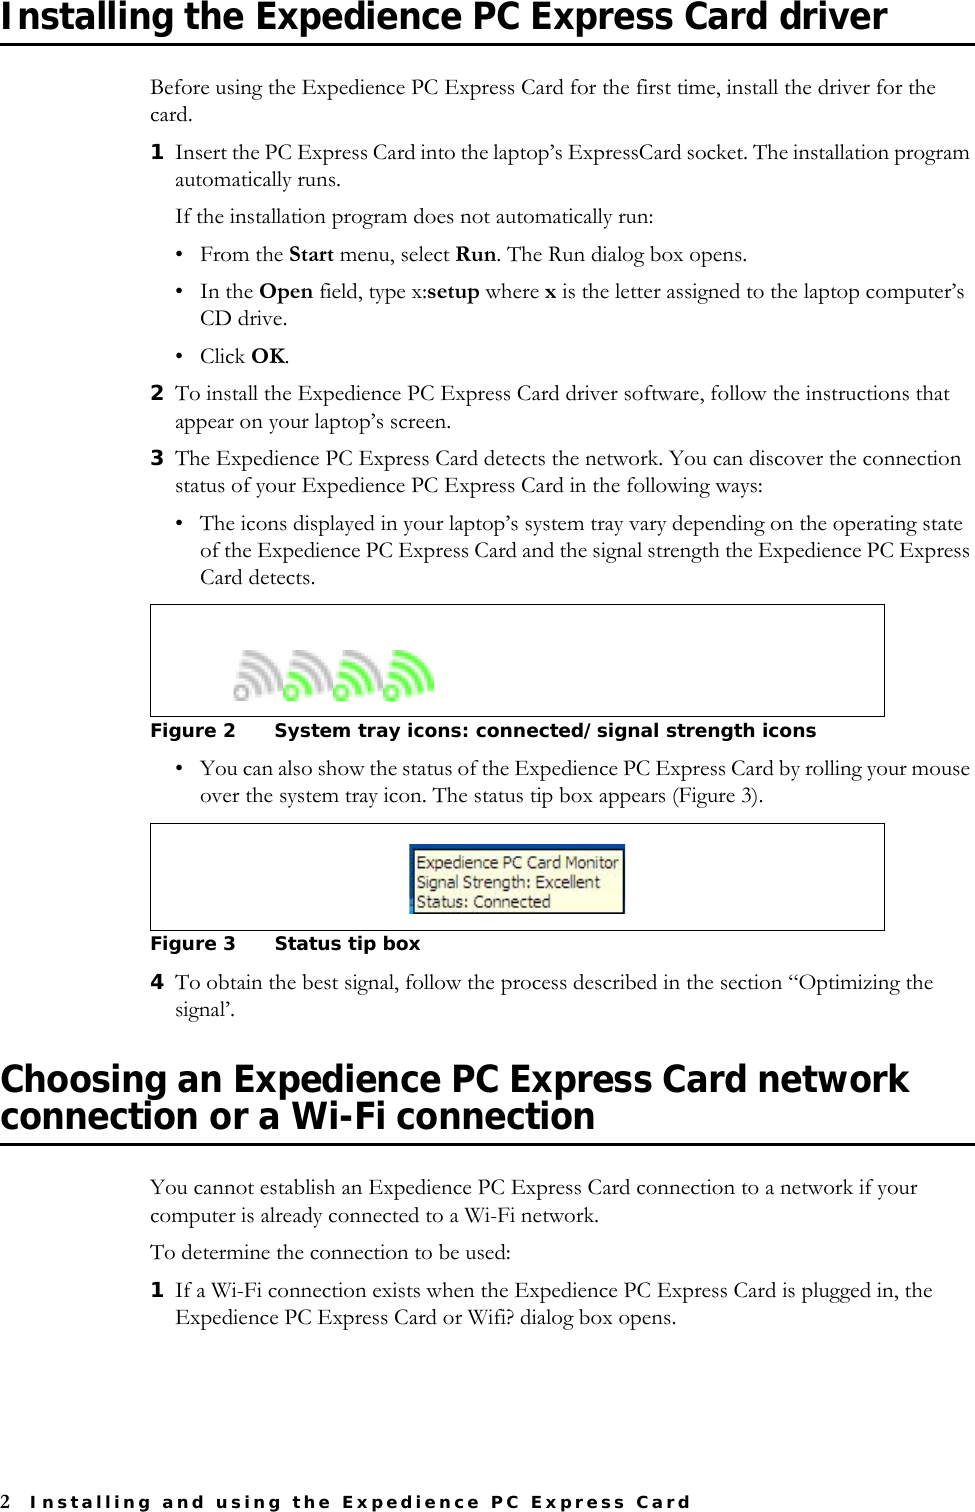 2Installing and using the Expedience PC Express CardInstalling the Expedience PC Express Card driverBefore using the Expedience PC Express Card for the first time, install the driver for the card.1Insert the PC Express Card into the laptop’s ExpressCard socket. The installation program automatically runs. If the installation program does not automatically run: •From the Start menu, select Run. The Run dialog box opens.•In the Open field, type x:setup where x is the letter assigned to the laptop computer’s CD drive. • Click OK.2To install the Expedience PC Express Card driver software, follow the instructions that appear on your laptop’s screen.3The Expedience PC Express Card detects the network. You can discover the connection status of your Expedience PC Express Card in the following ways: • The icons displayed in your laptop’s system tray vary depending on the operating state of the Expedience PC Express Card and the signal strength the Expedience PC Express Card detects.• You can also show the status of the Expedience PC Express Card by rolling your mouse over the system tray icon. The status tip box appears (Figure 3). 4To obtain the best signal, follow the process described in the section “Optimizing the signal’.Choosing an Expedience PC Express Card network connection or a Wi-Fi connectionYou cannot establish an Expedience PC Express Card connection to a network if your computer is already connected to a Wi-Fi network. To determine the connection to be used:1If a Wi-Fi connection exists when the Expedience PC Express Card is plugged in, the Expedience PC Express Card or Wifi? dialog box opens. Figure 2 System tray icons: connected/signal strength icons Figure 3 Status tip box